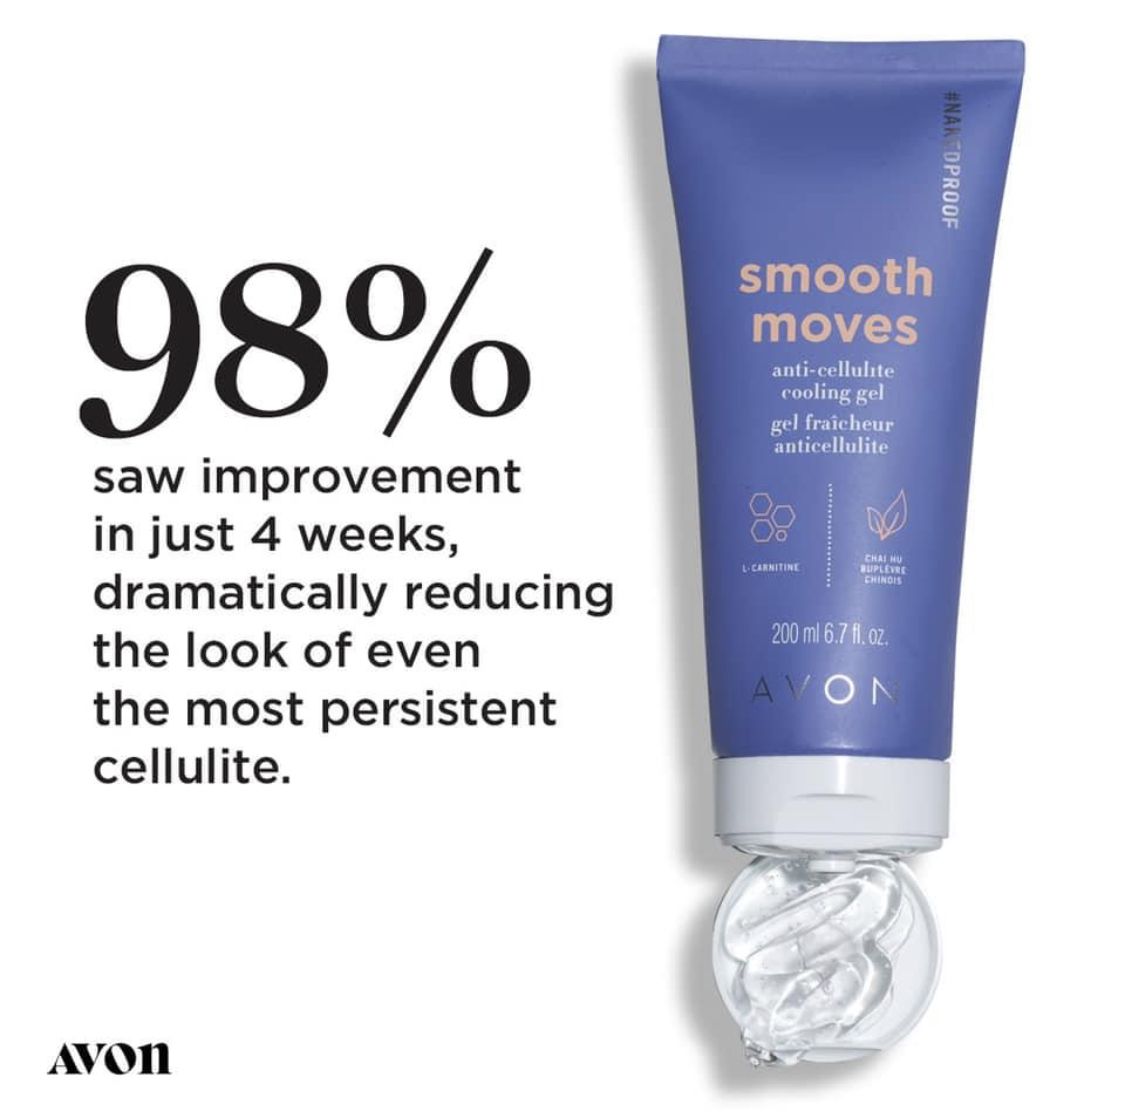 NakedProof Smooth Moves Anti-Cellulite Cooling Gel by AVON